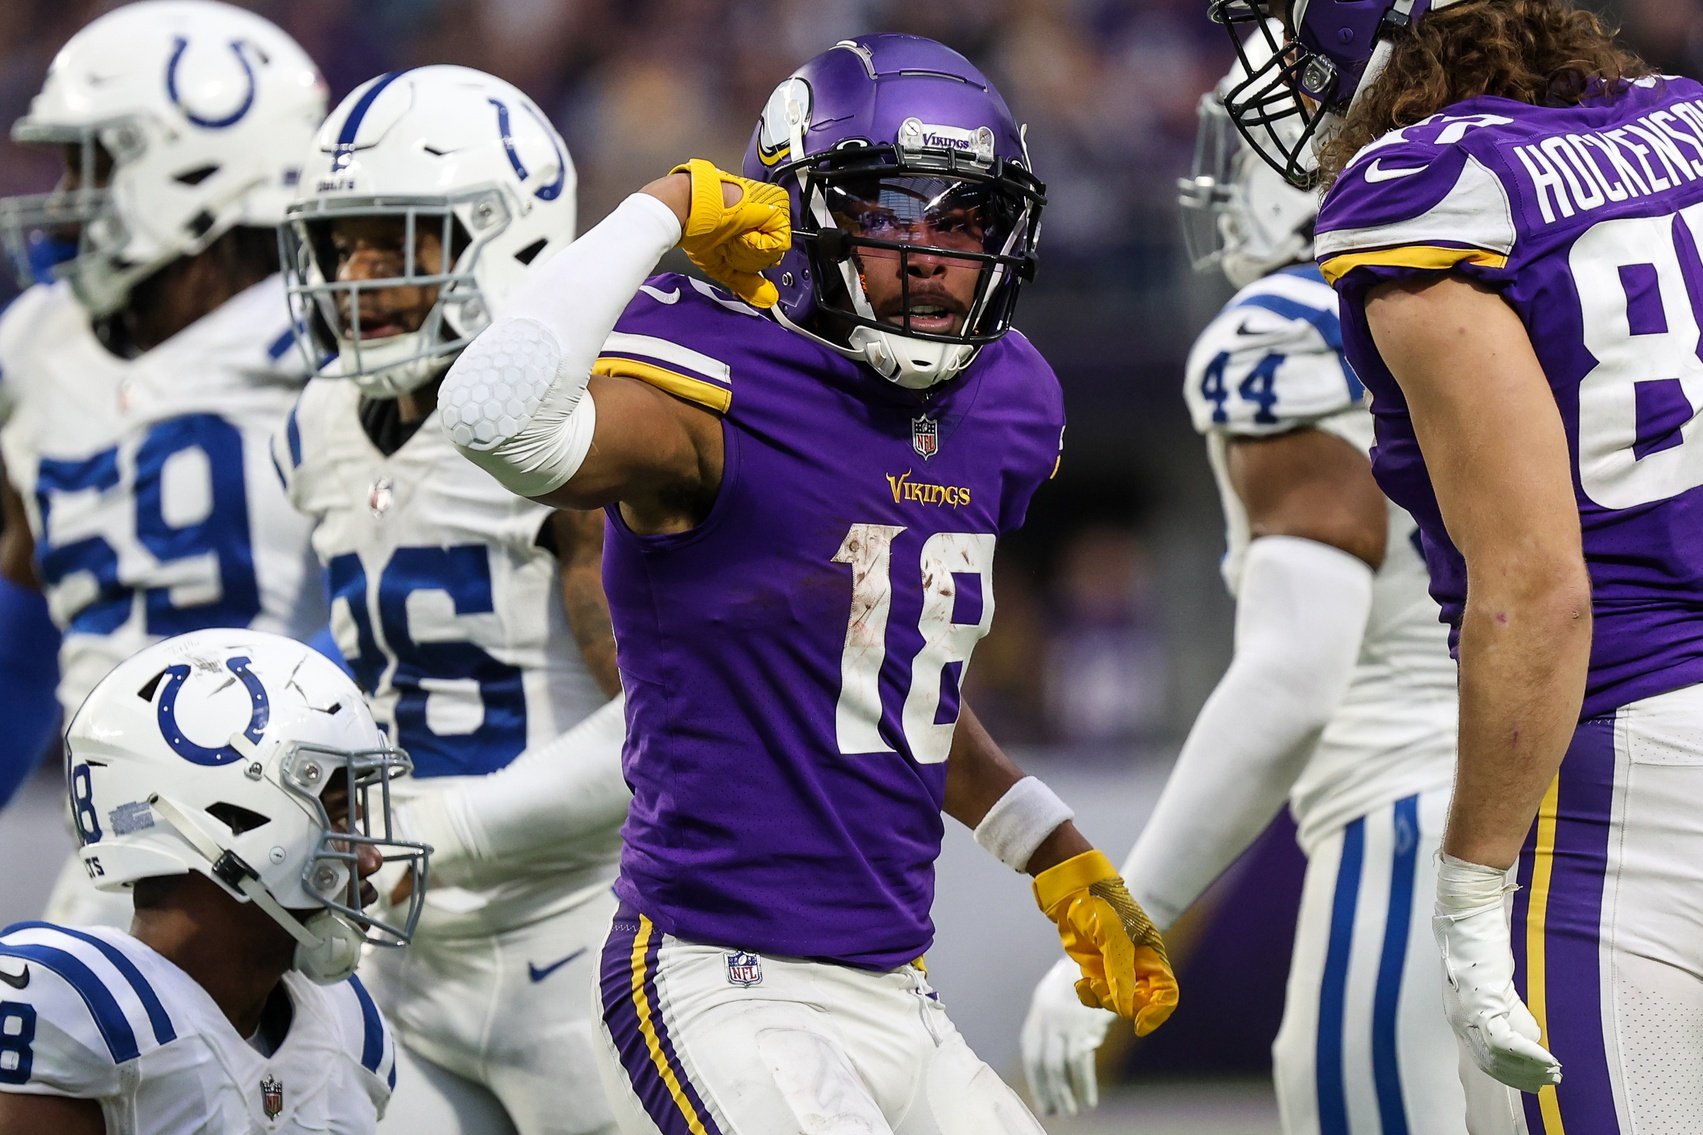 Minnesota Vikings wide receiver Justin Jefferson (18) reacts to his catch during the fourth quarter against the Indianapolis Colts at U.S. Bank Stadium. Mandatory Credit: Matt Krohn-USA TODAY Sports